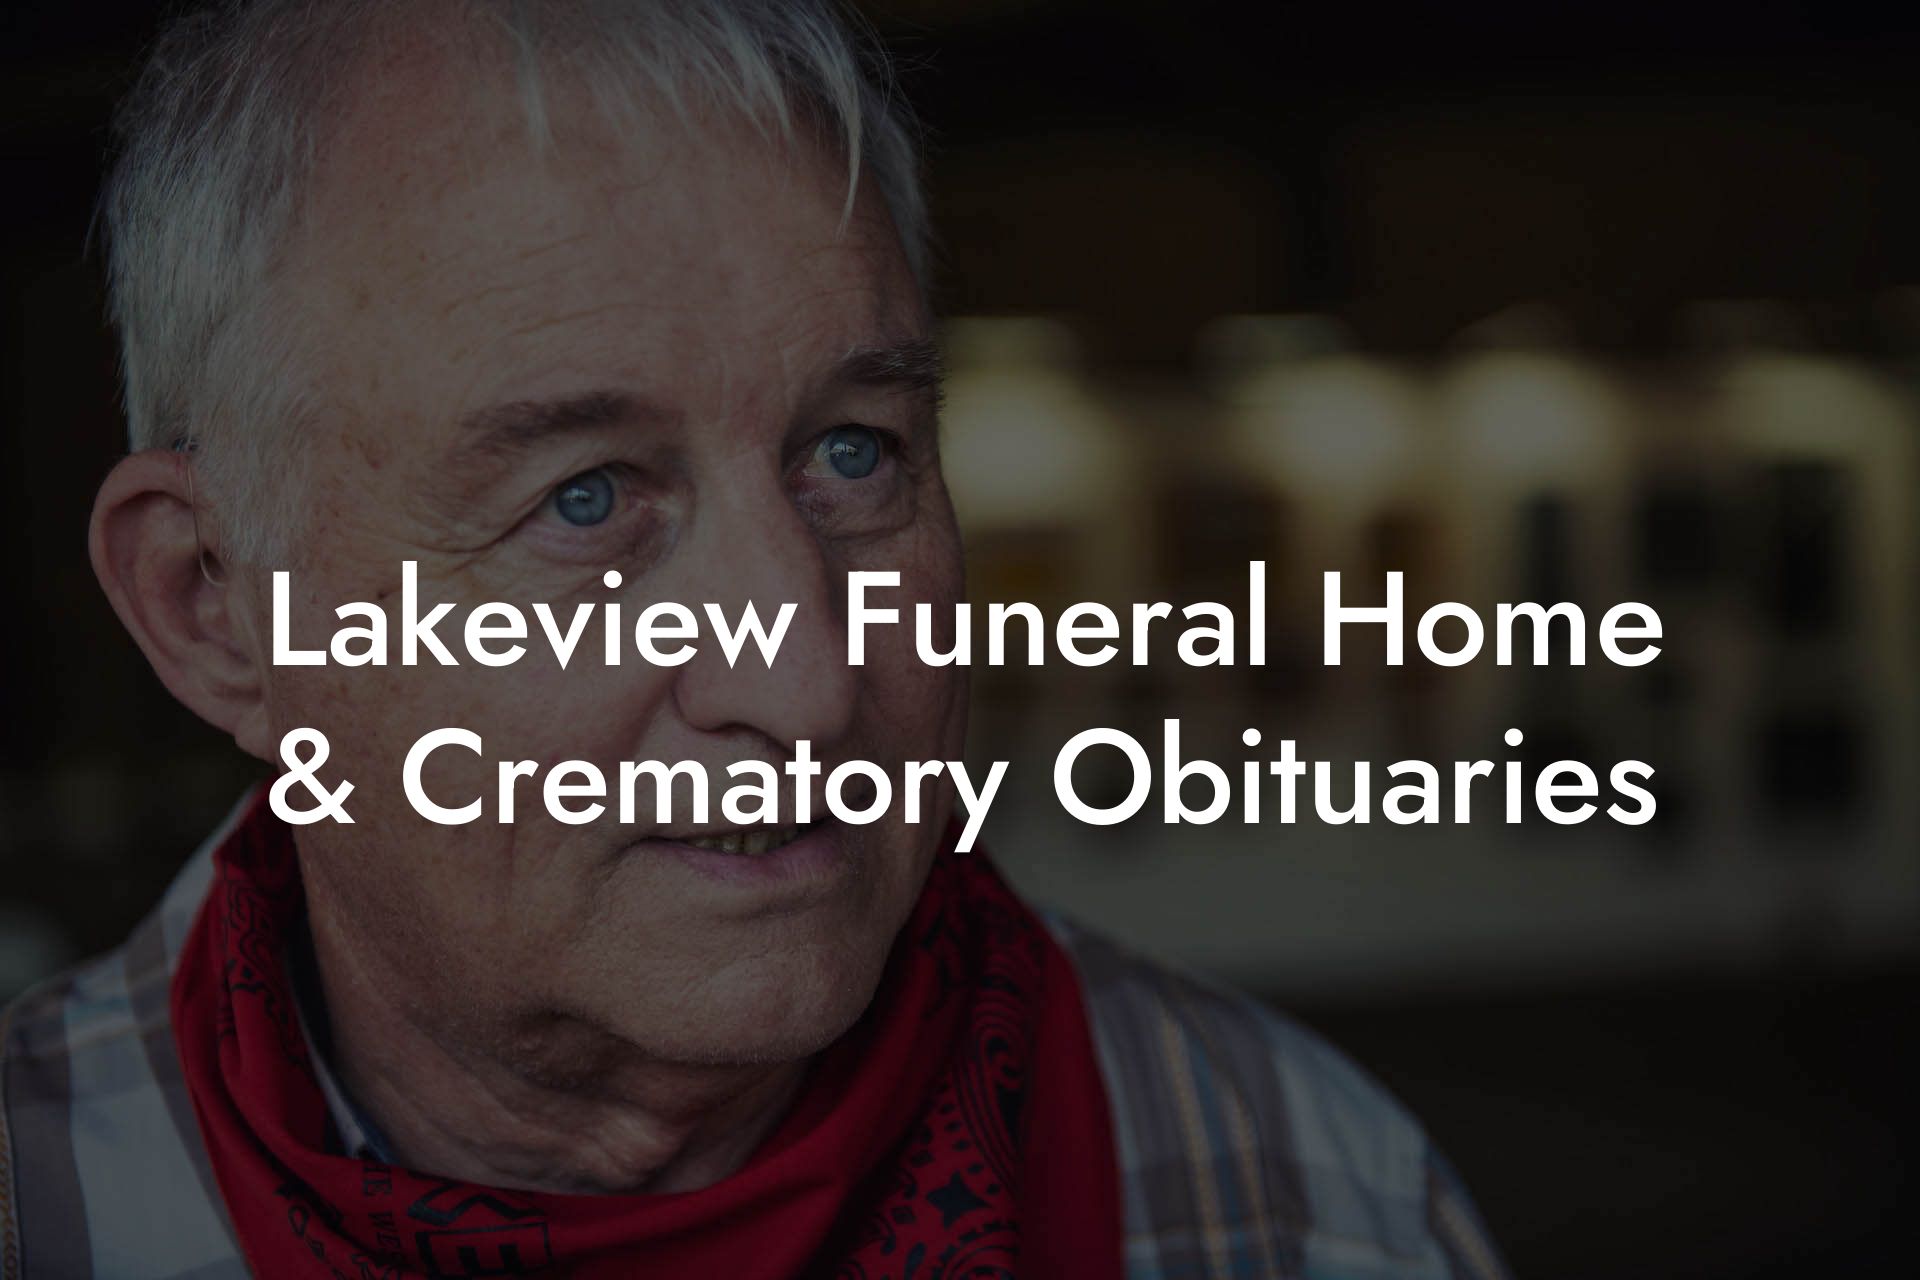 Lakeview Funeral Home & Crematory Obituaries